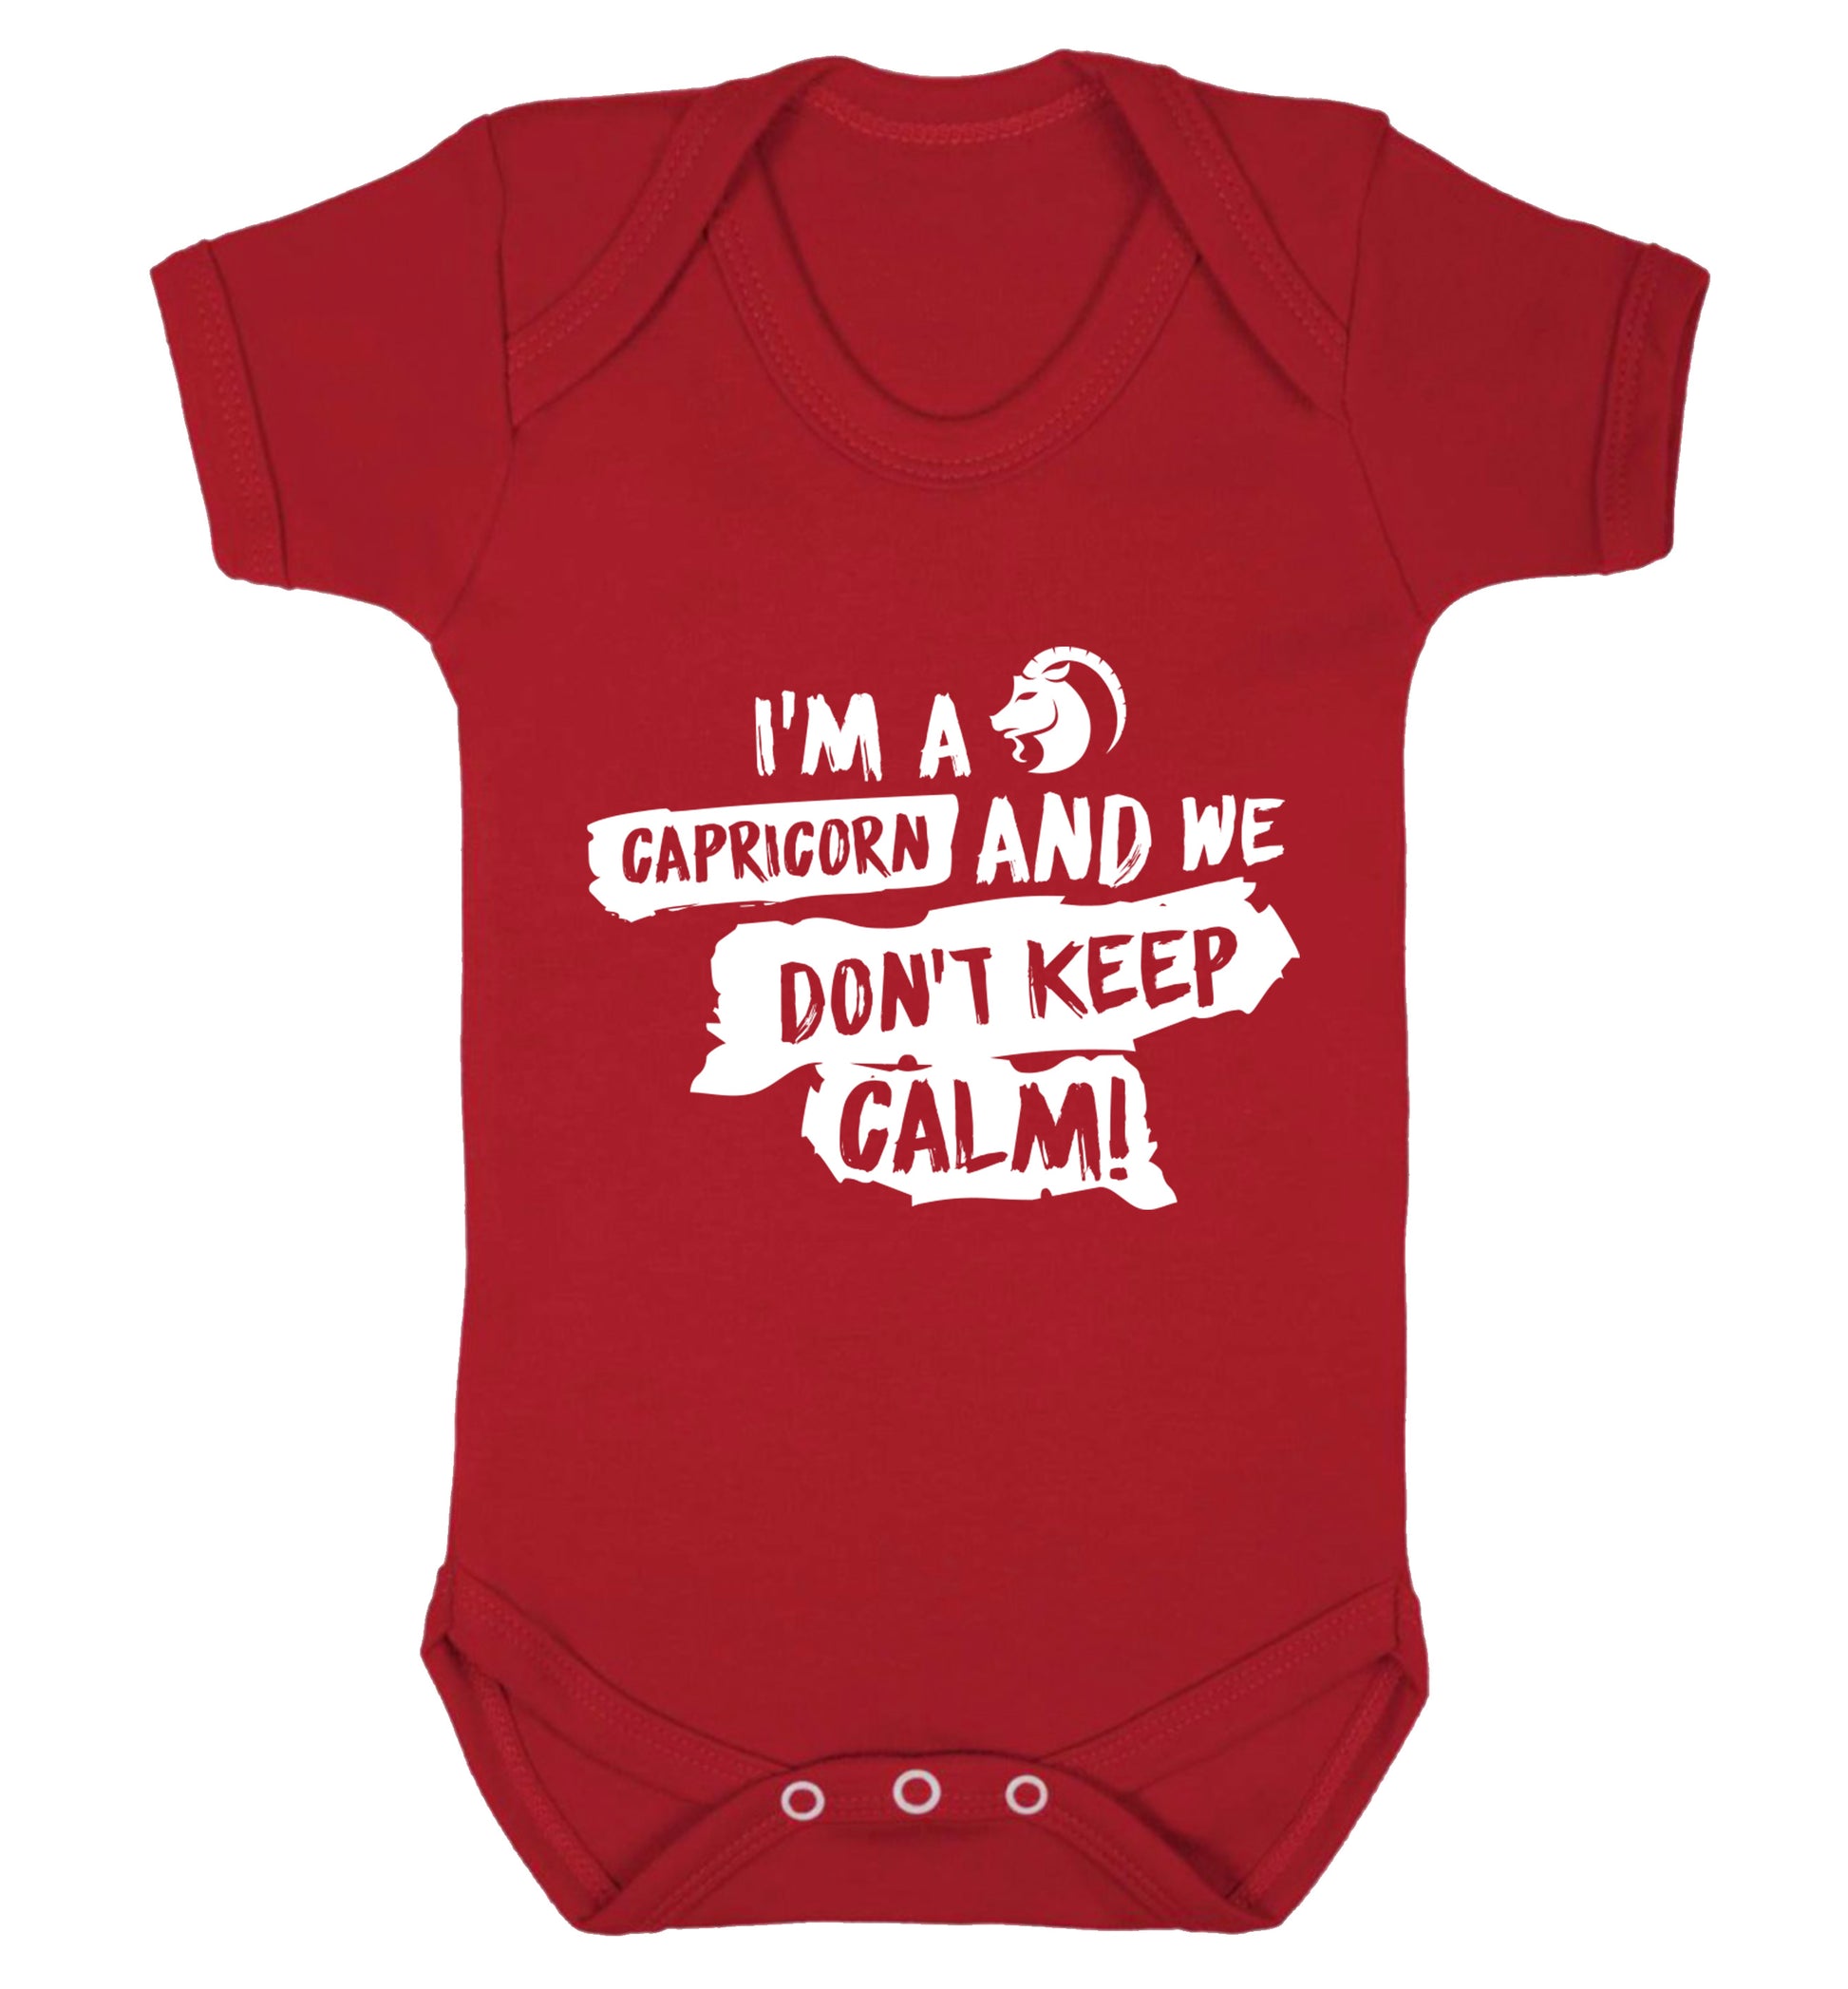 I'm a capricorn and we don't keep calm Baby Vest red 18-24 months